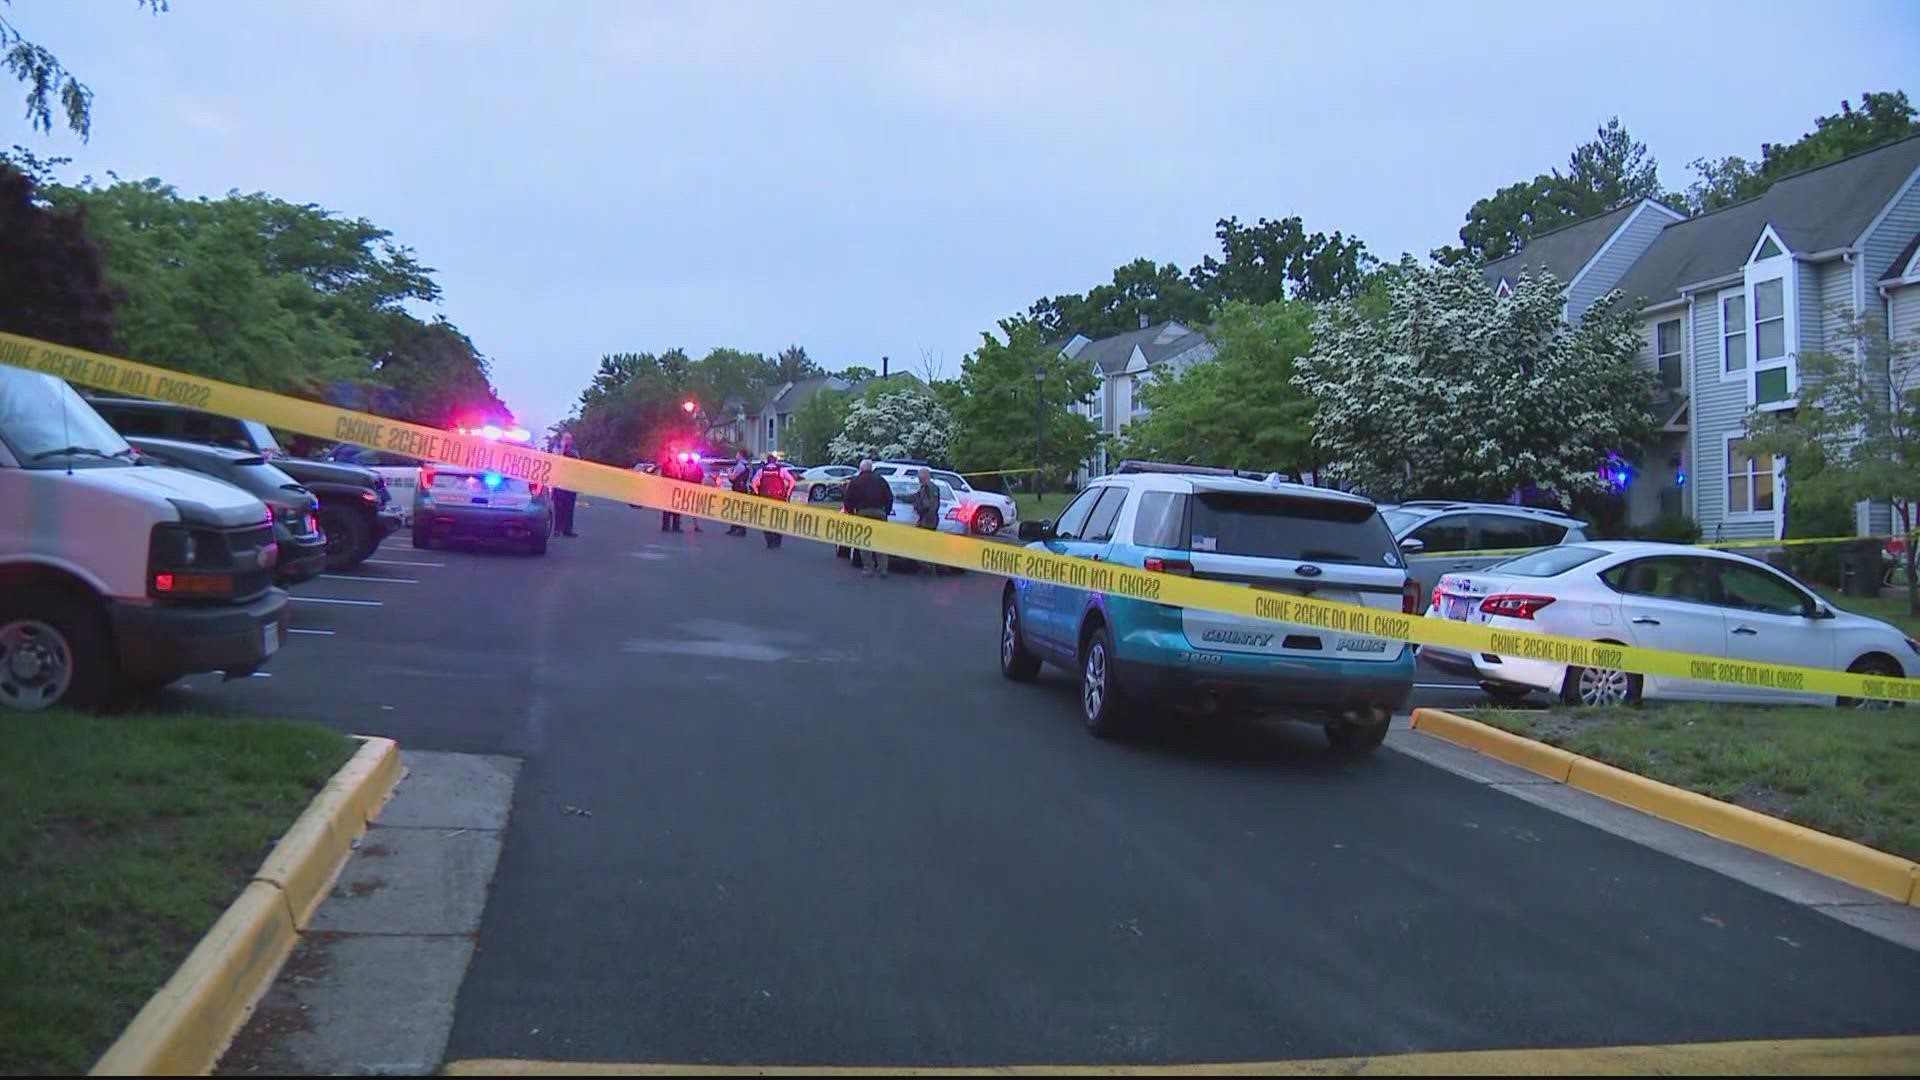 A 9-year-old girl was shot outside while playing tic-tac-toe with her friends in a Woodbridge neighborhood.